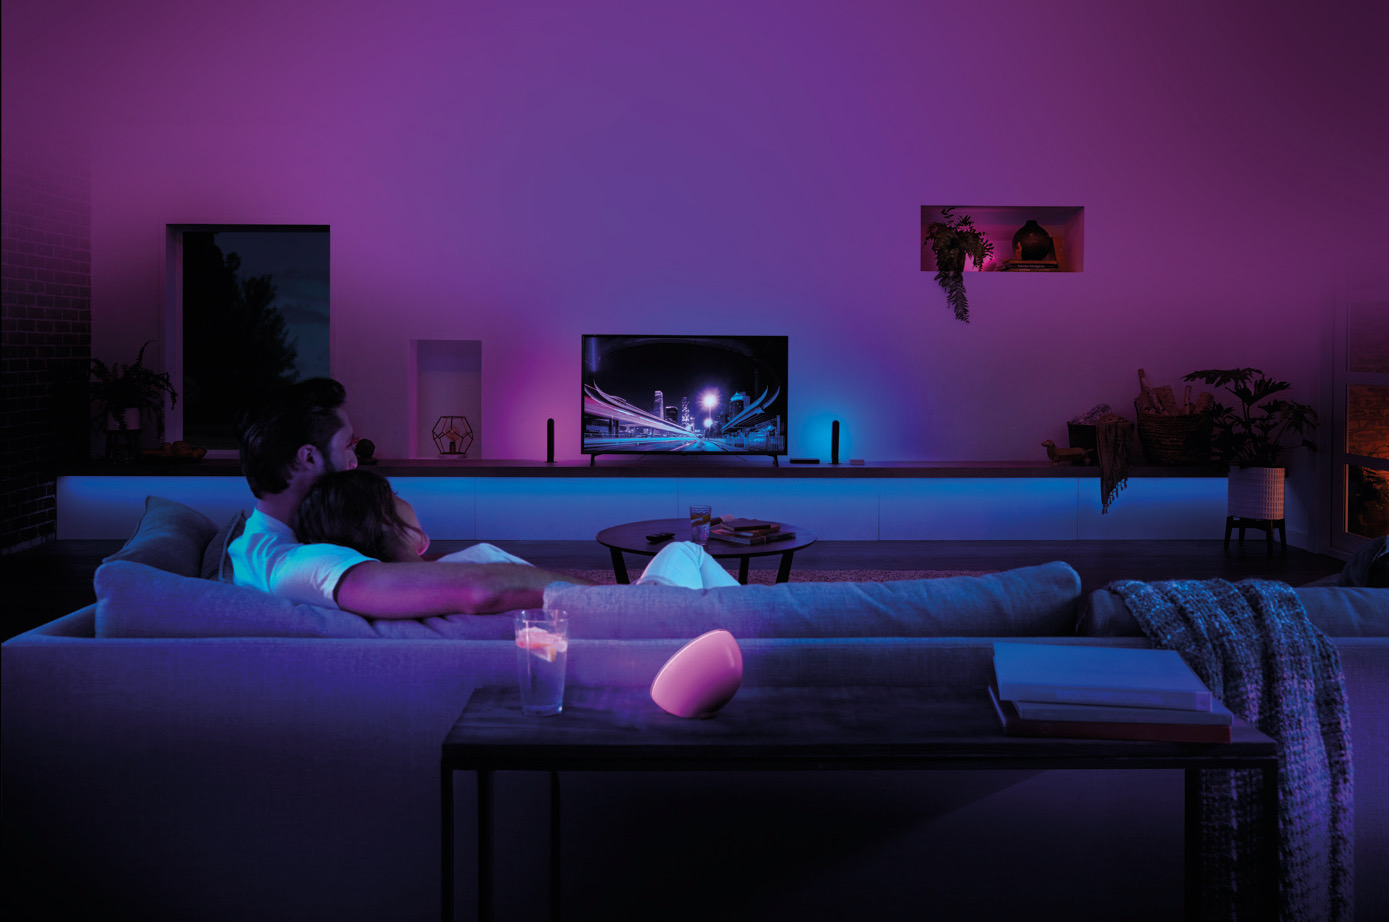 Hueblog: Major update: The Philips Hue Play HDMI Sync Box finally gets better